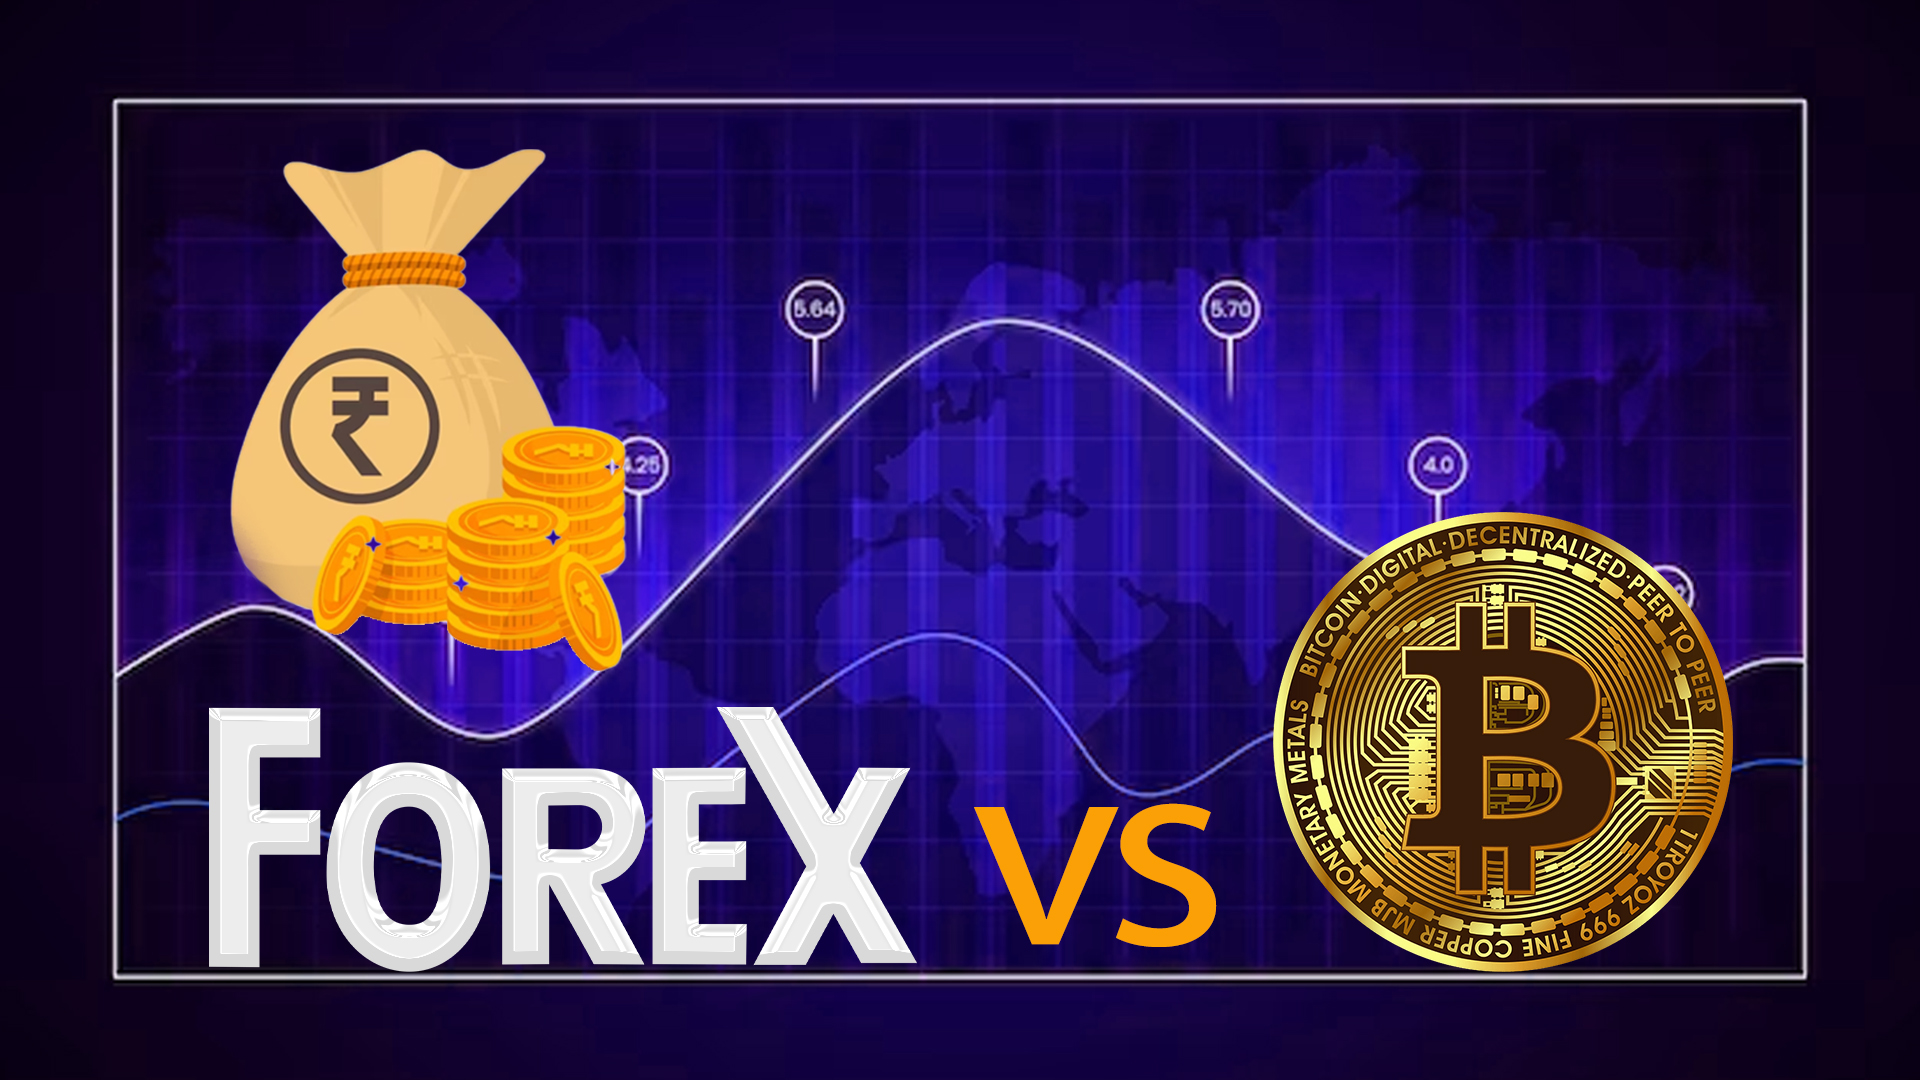 Forex Vs. Cryptocurrency Based On Volatility And Liquidity